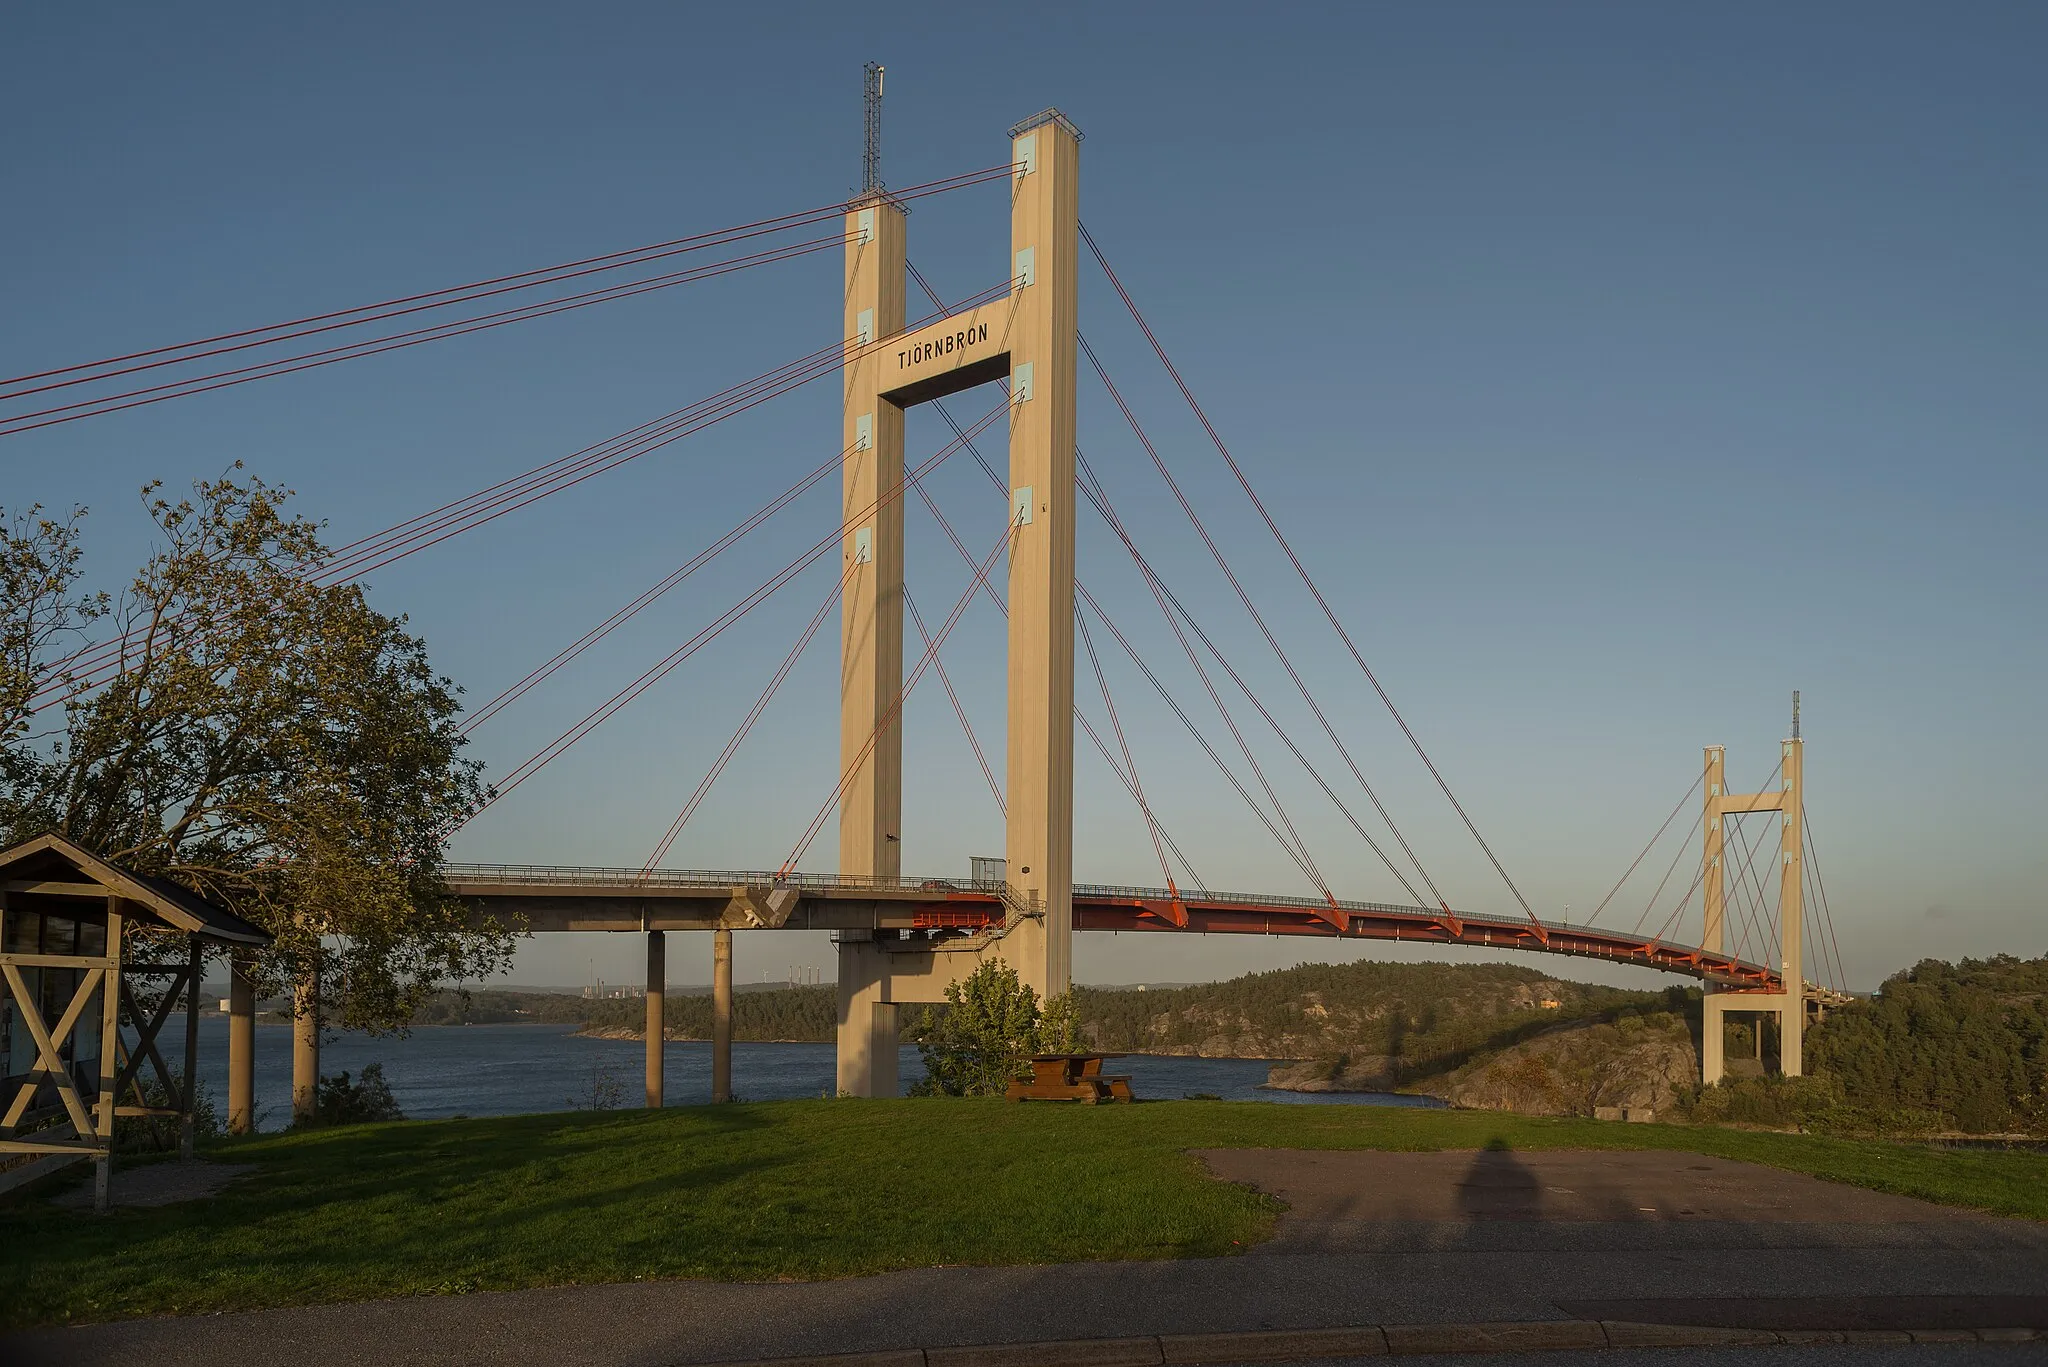 Photo showing: Tjörnbron (the Tjörn bridge).  Tjörnbron is one of three bridges along Tjörnbroleden that connects the islands of Tjörn and Orust to the mainland. Inaugurated in 1981, the bridge was built in record time after its predecessor, the Almö Bridge, which was inaugurated in June 1960, collapsed after the bulk carrier MS Star Clipper collided with its span on 18 January 1980.